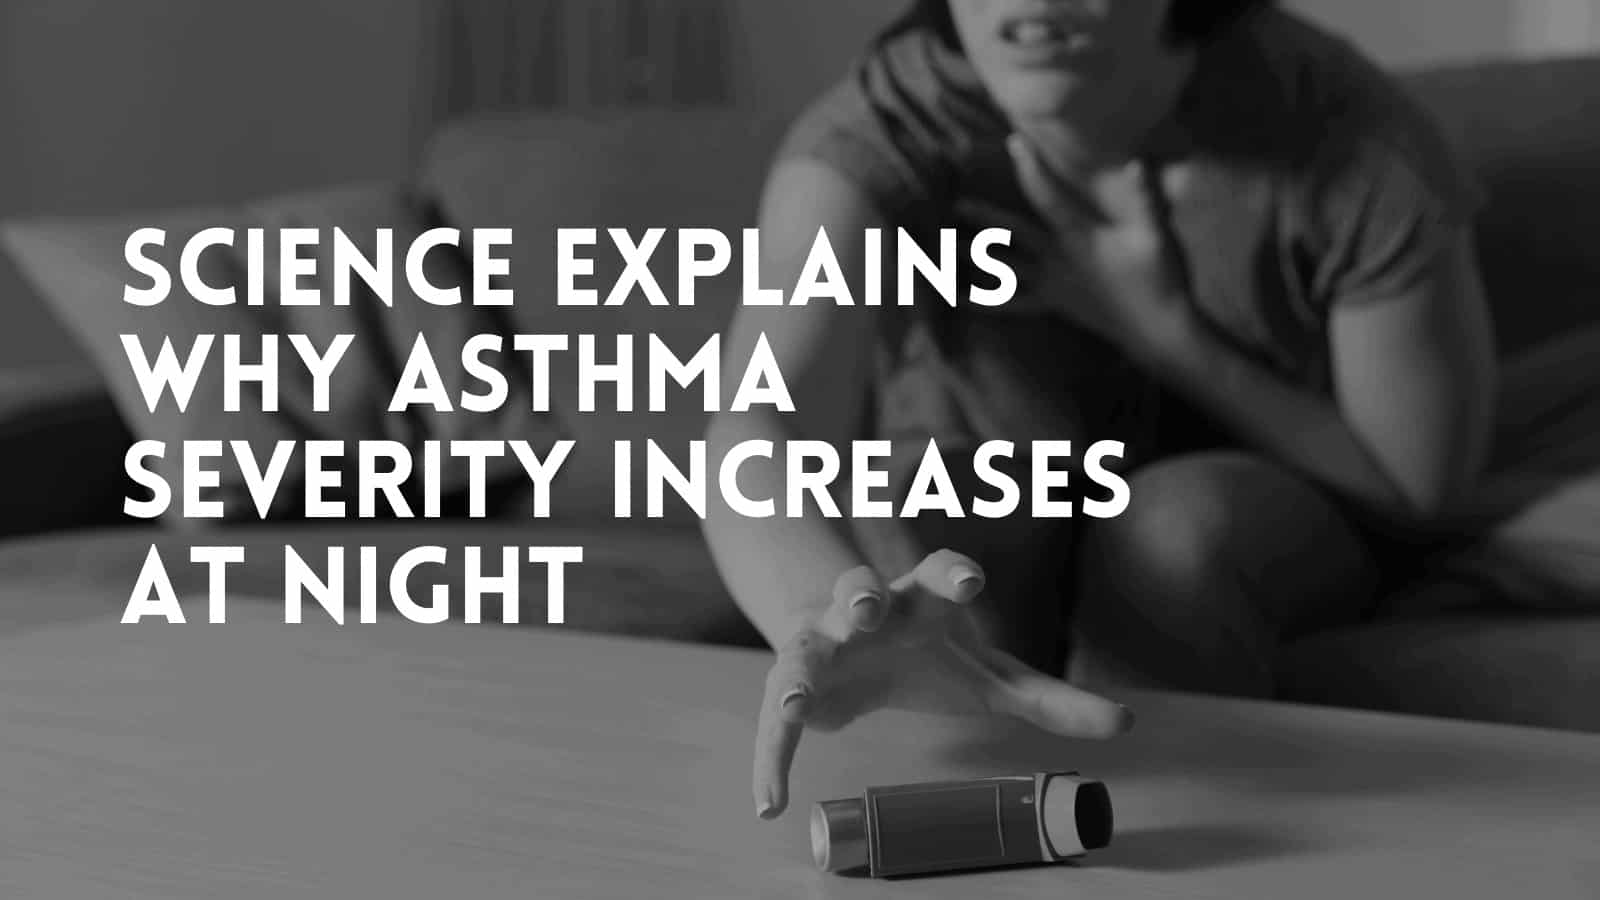 Science Explains Why Asthma Severity Increases at Night 